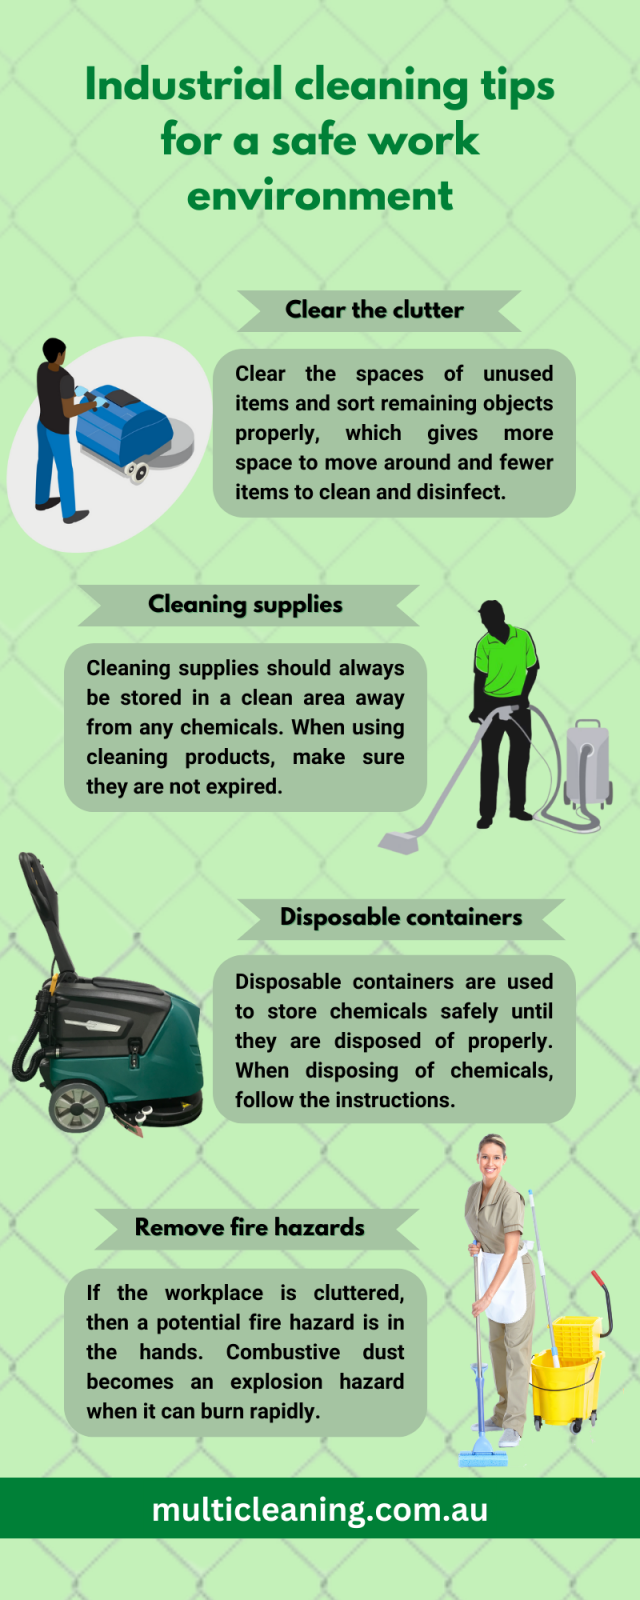 Industrial cleaning tips for a safe work environment